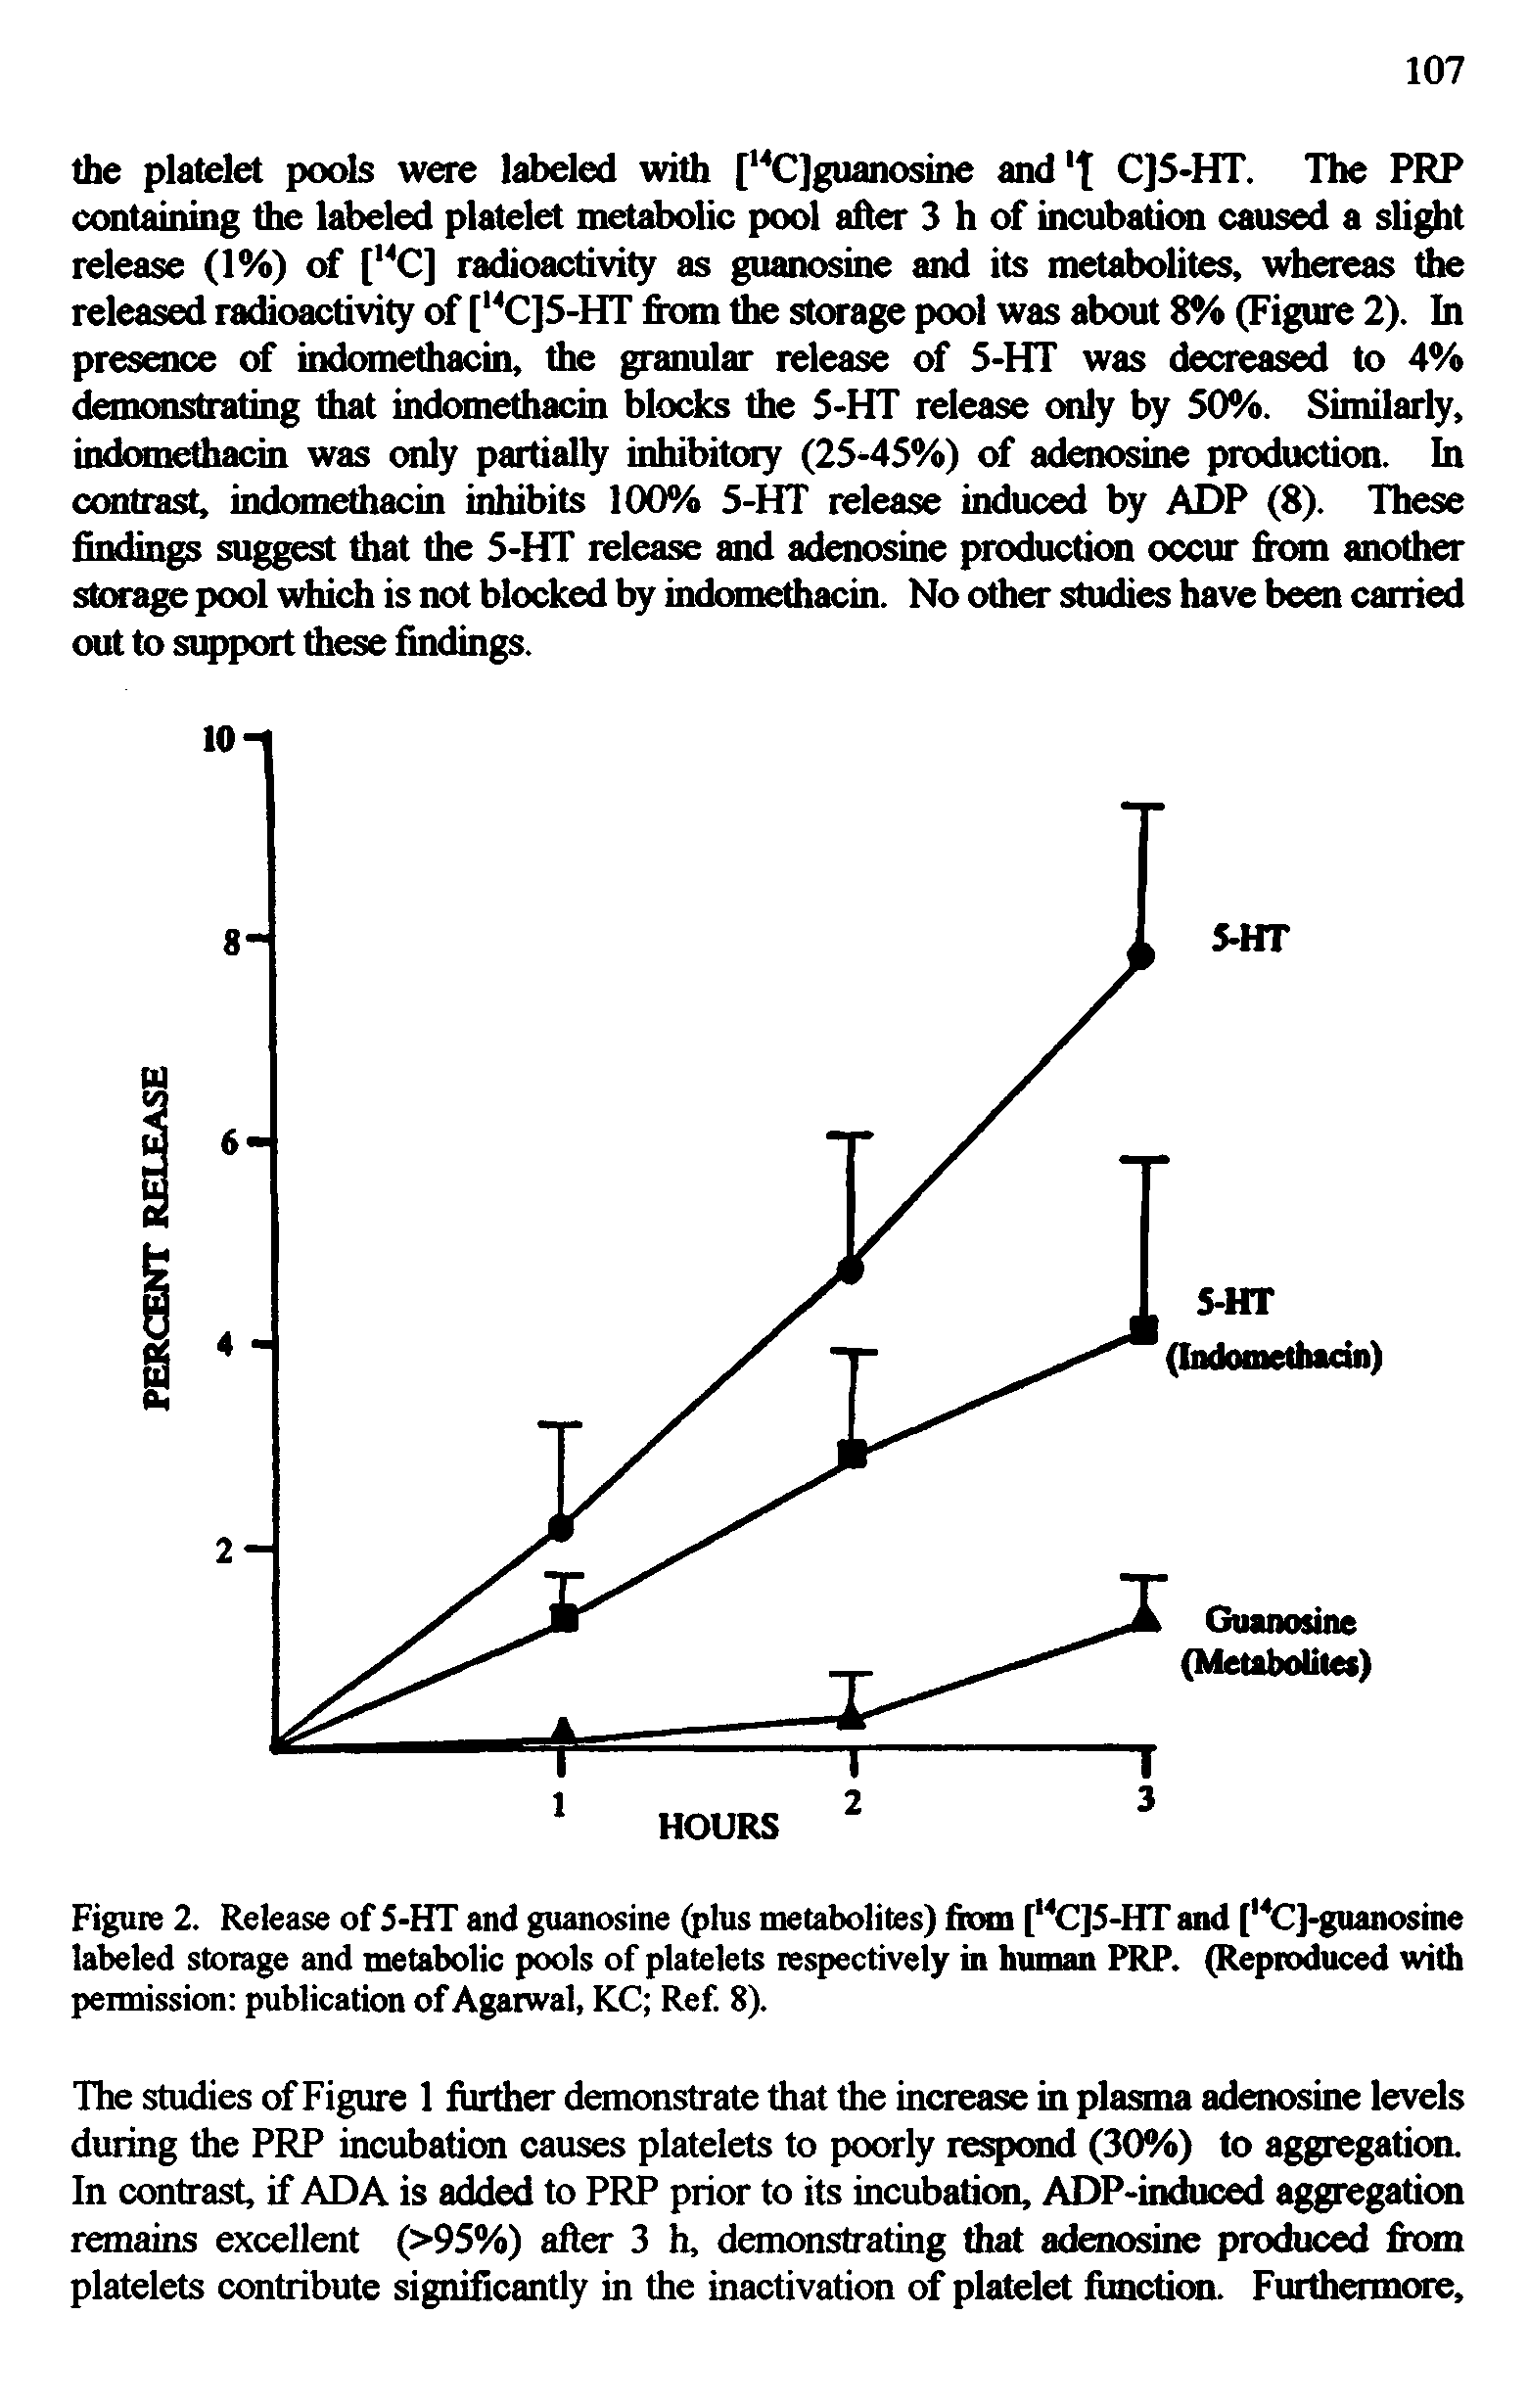 Figure 2. Release of S-HT and guanosine (plus metabolites) fiom [ C]S-HT and [ C]-guanosine labeled storage and metabolic pools of platelets respectively in human PRP. Reproduced with pemiission publication of Agatwal, KC Ref. 8).